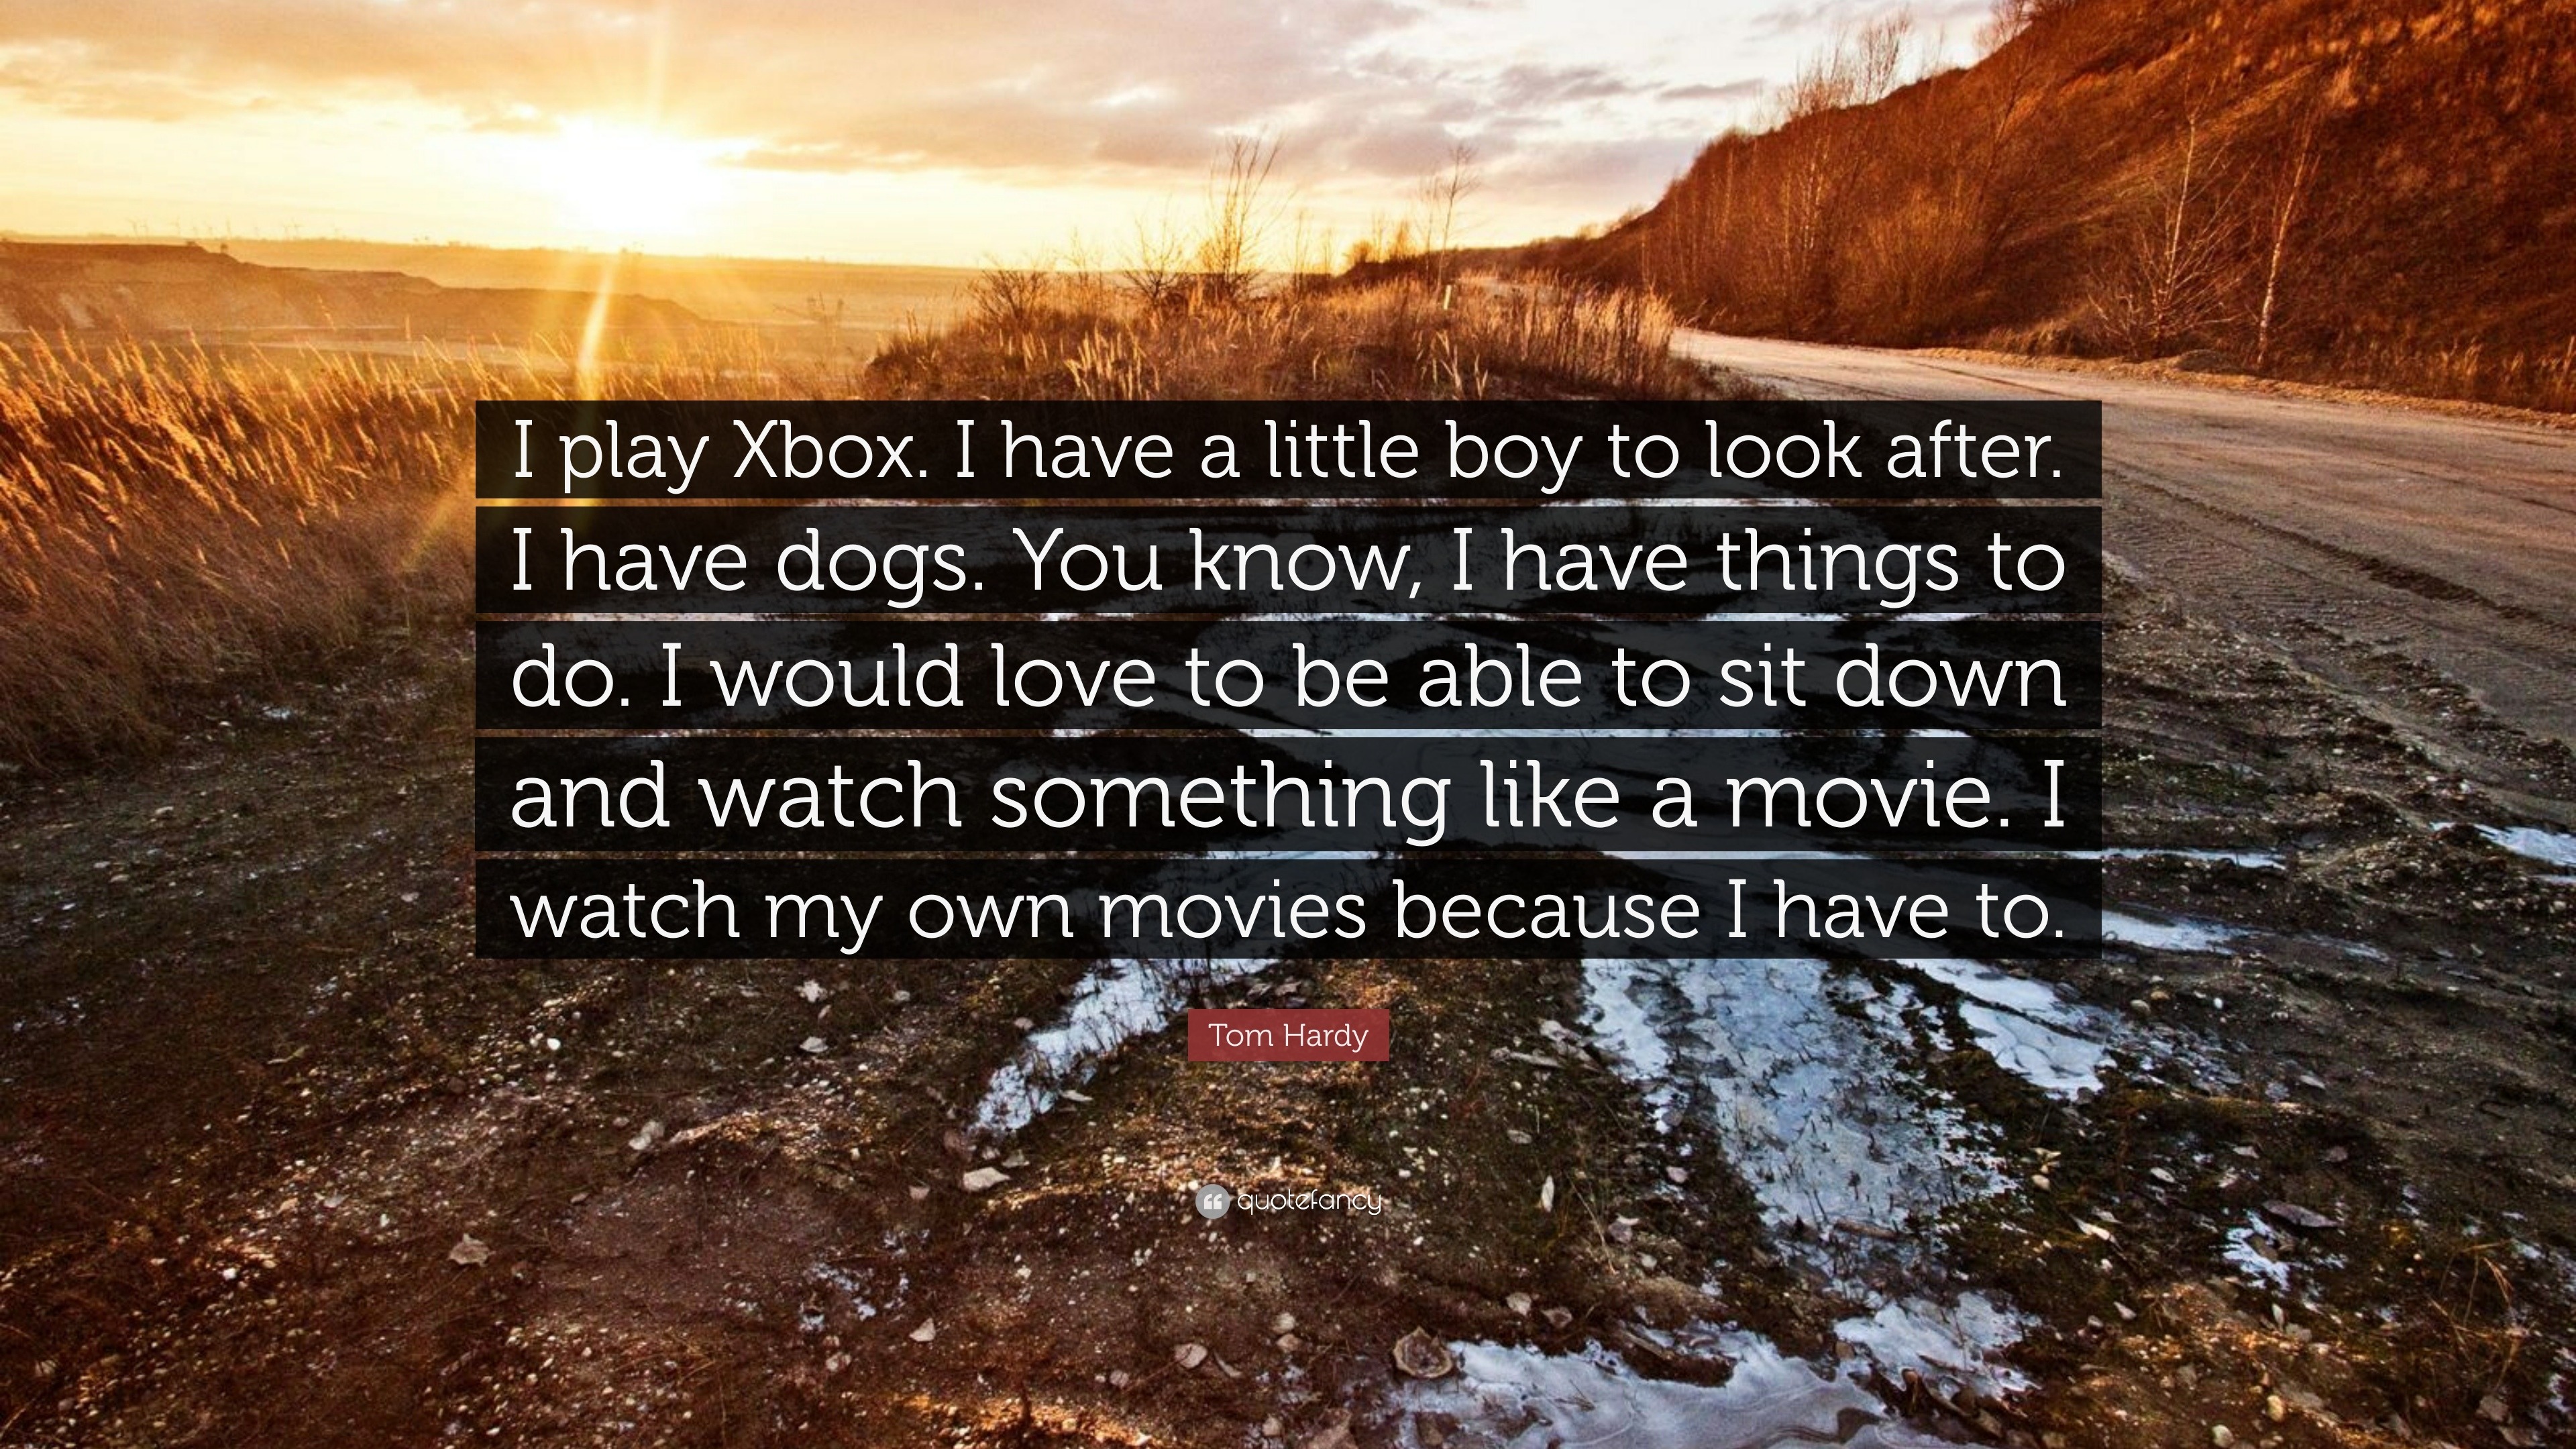 Tom Hardy Quote “I play Xbox I have a little boy to look